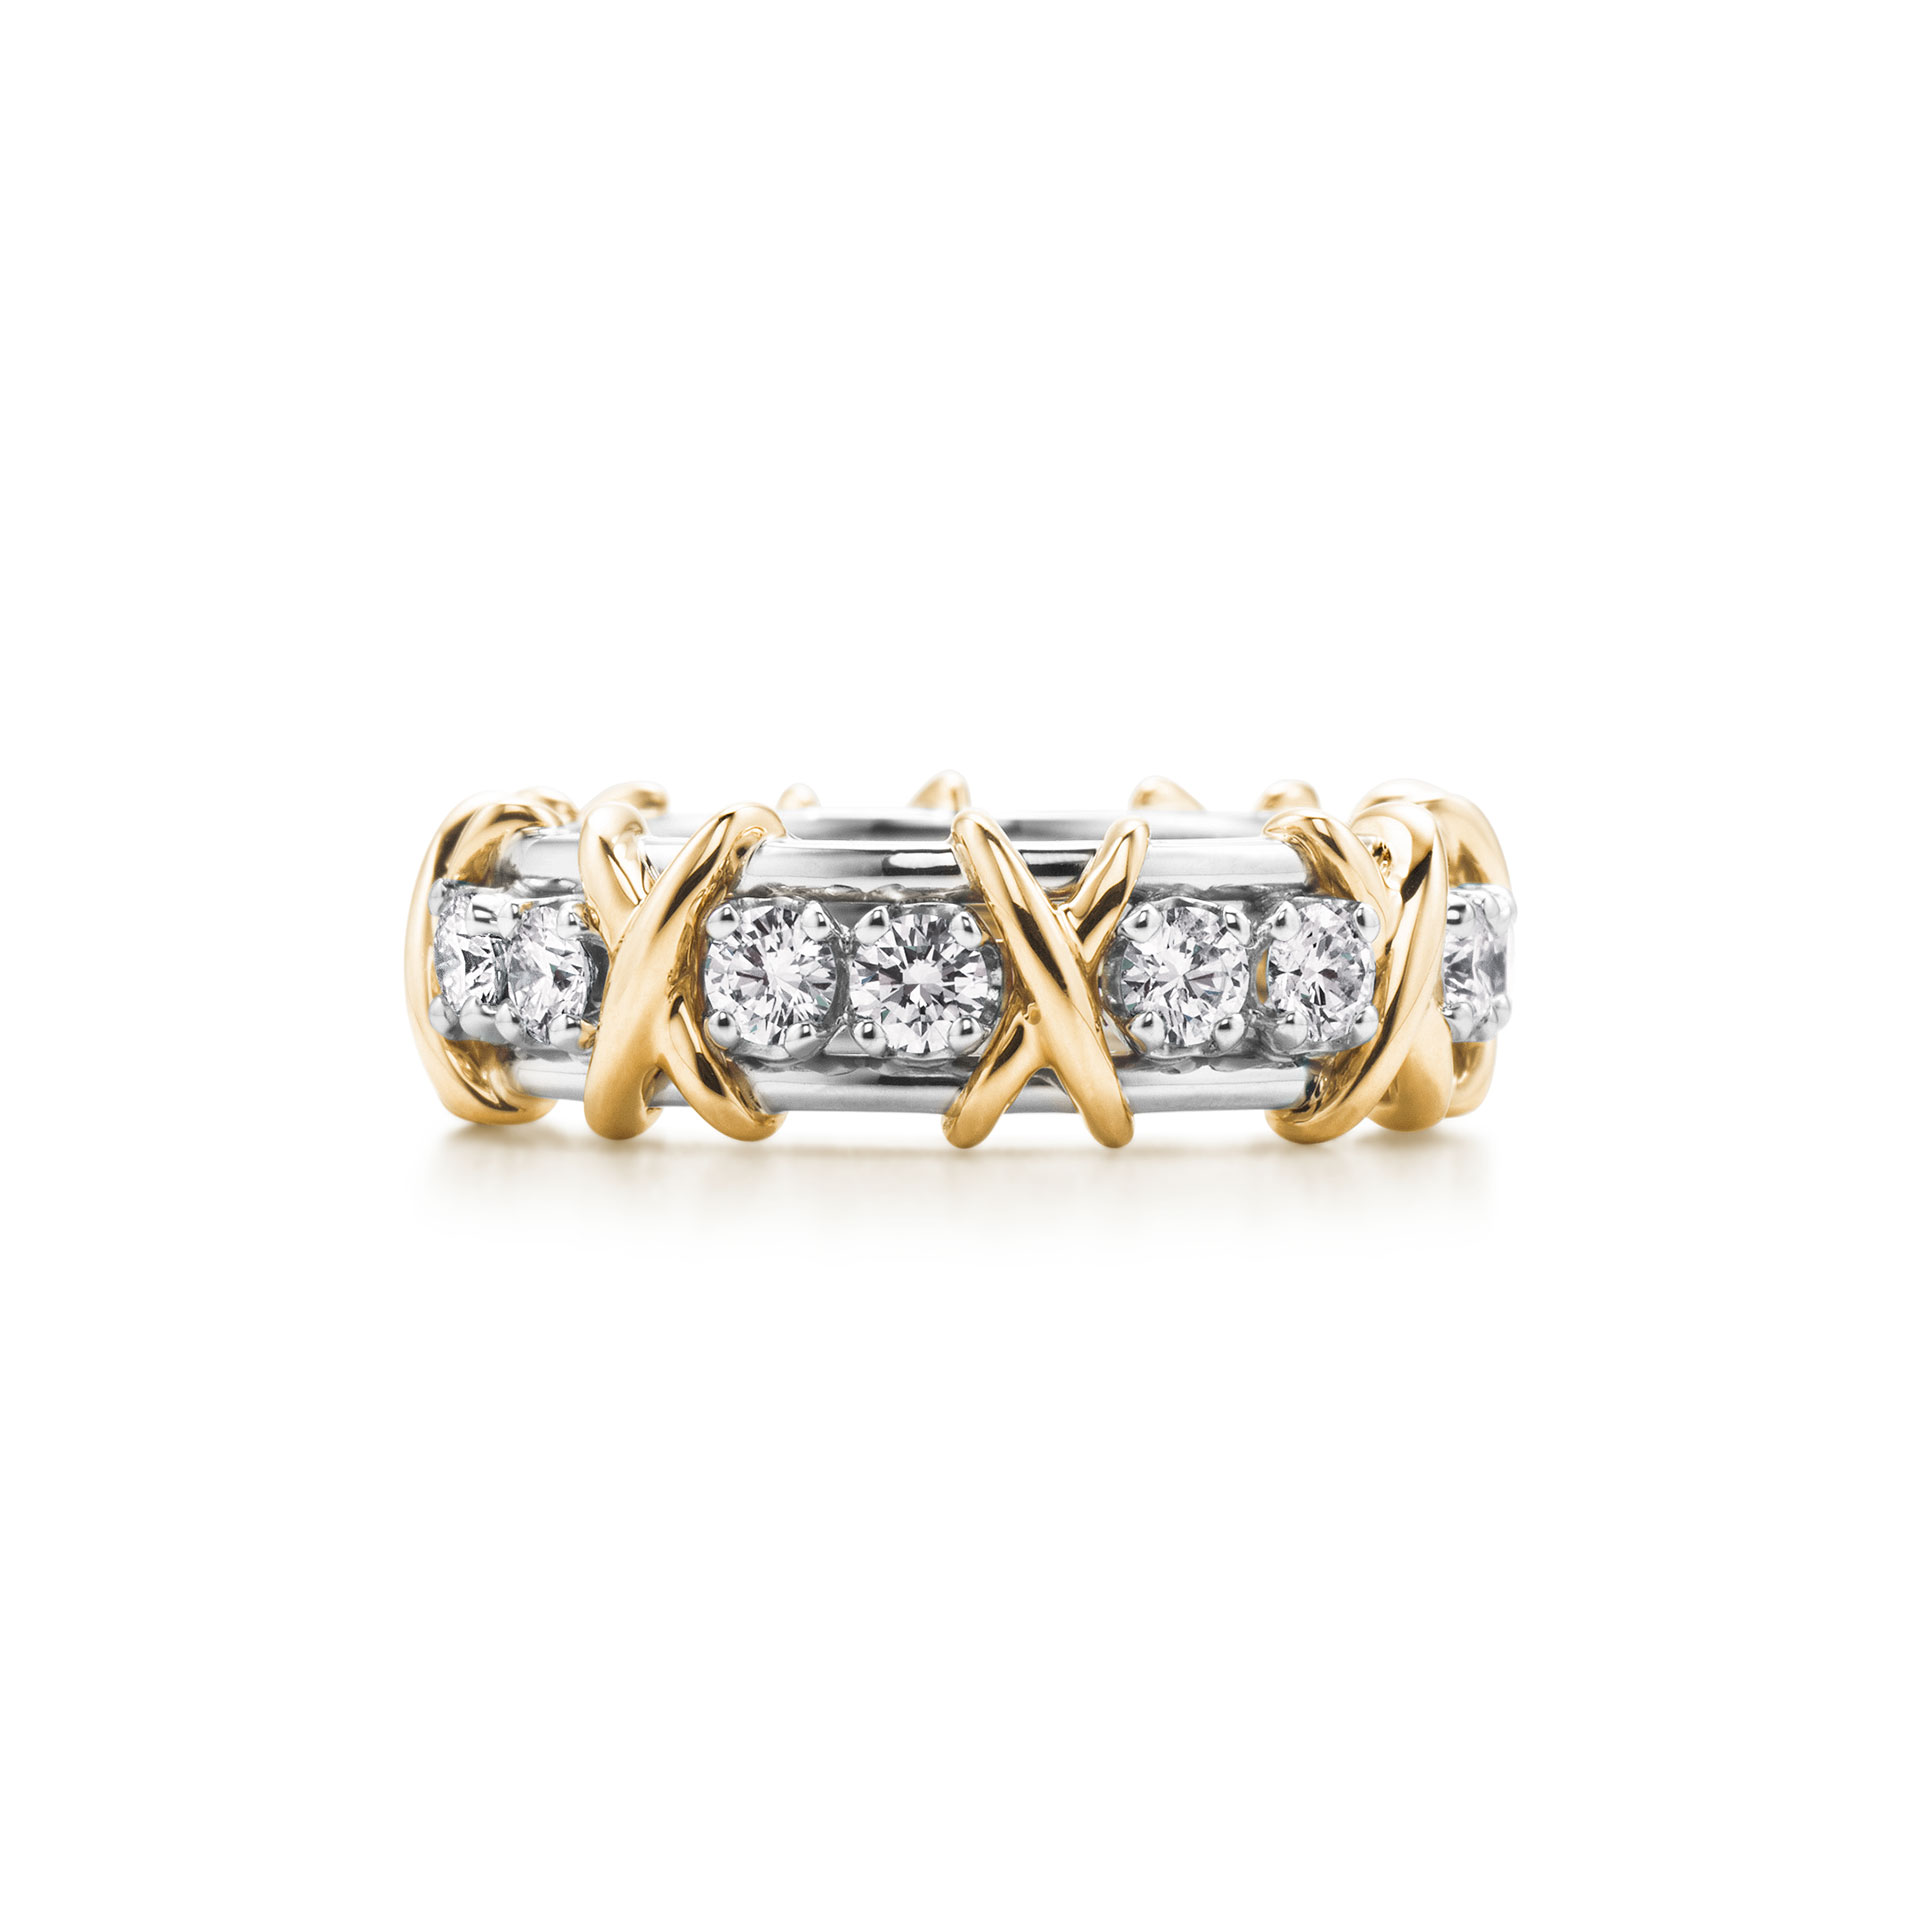 Tiffany & Co. Schlumberger® Sixteen Stone ring with diamonds